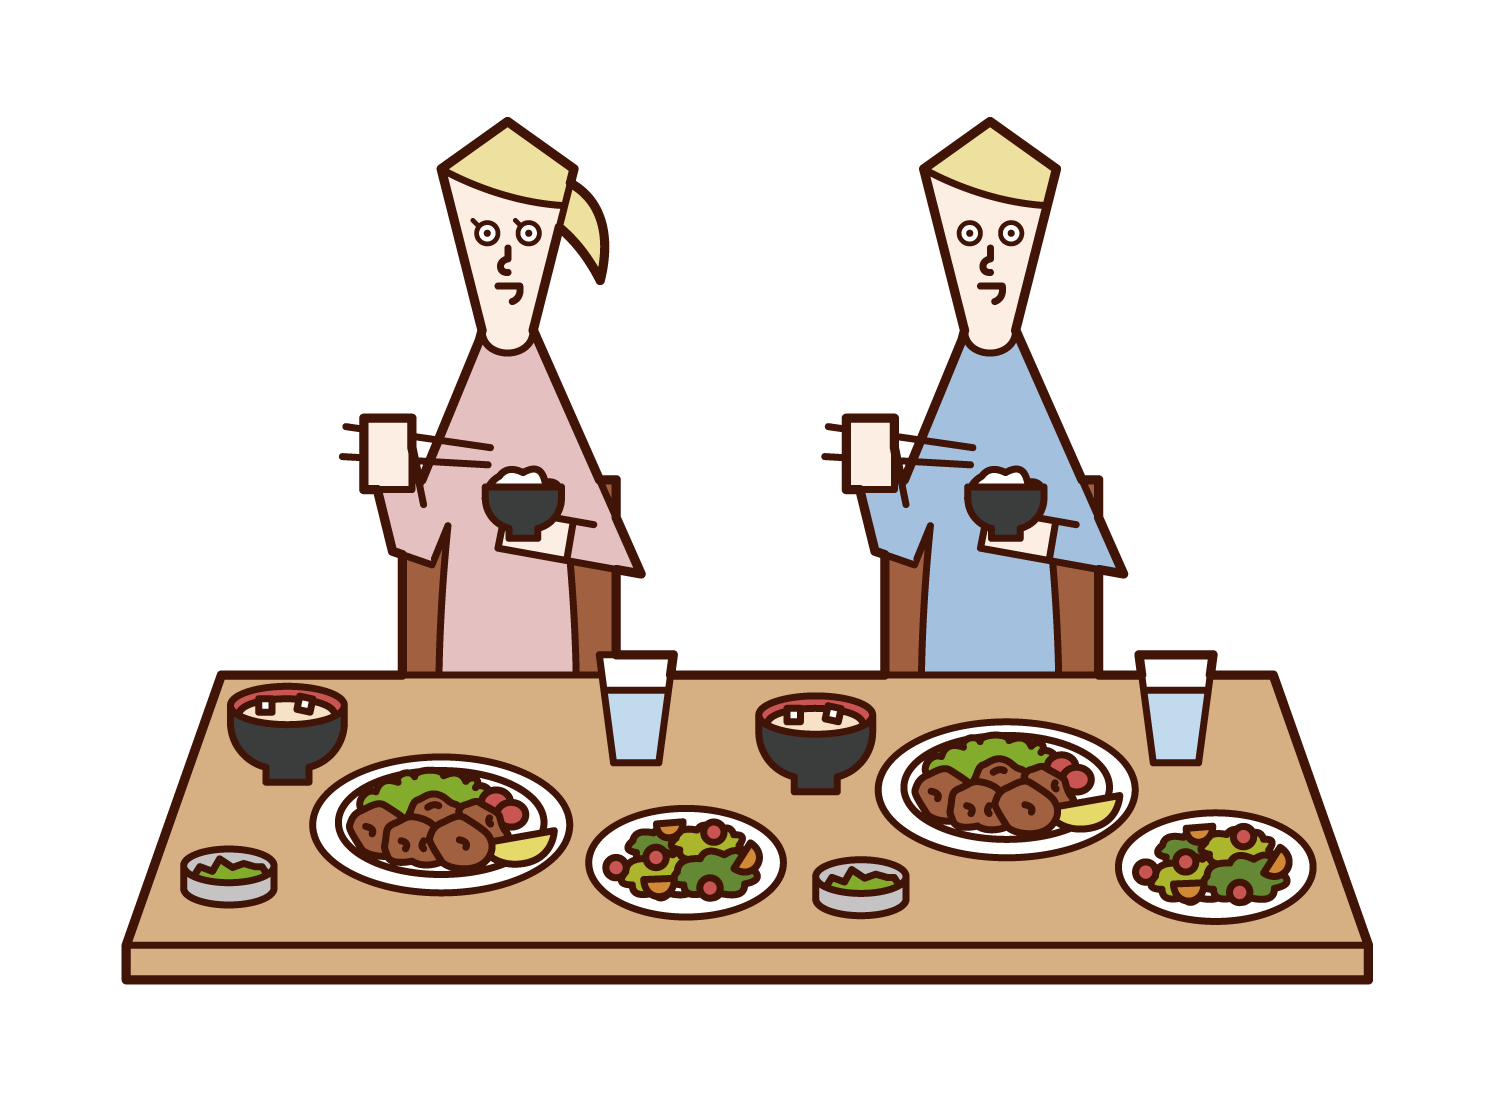 Illustrations of people (men and women) eating